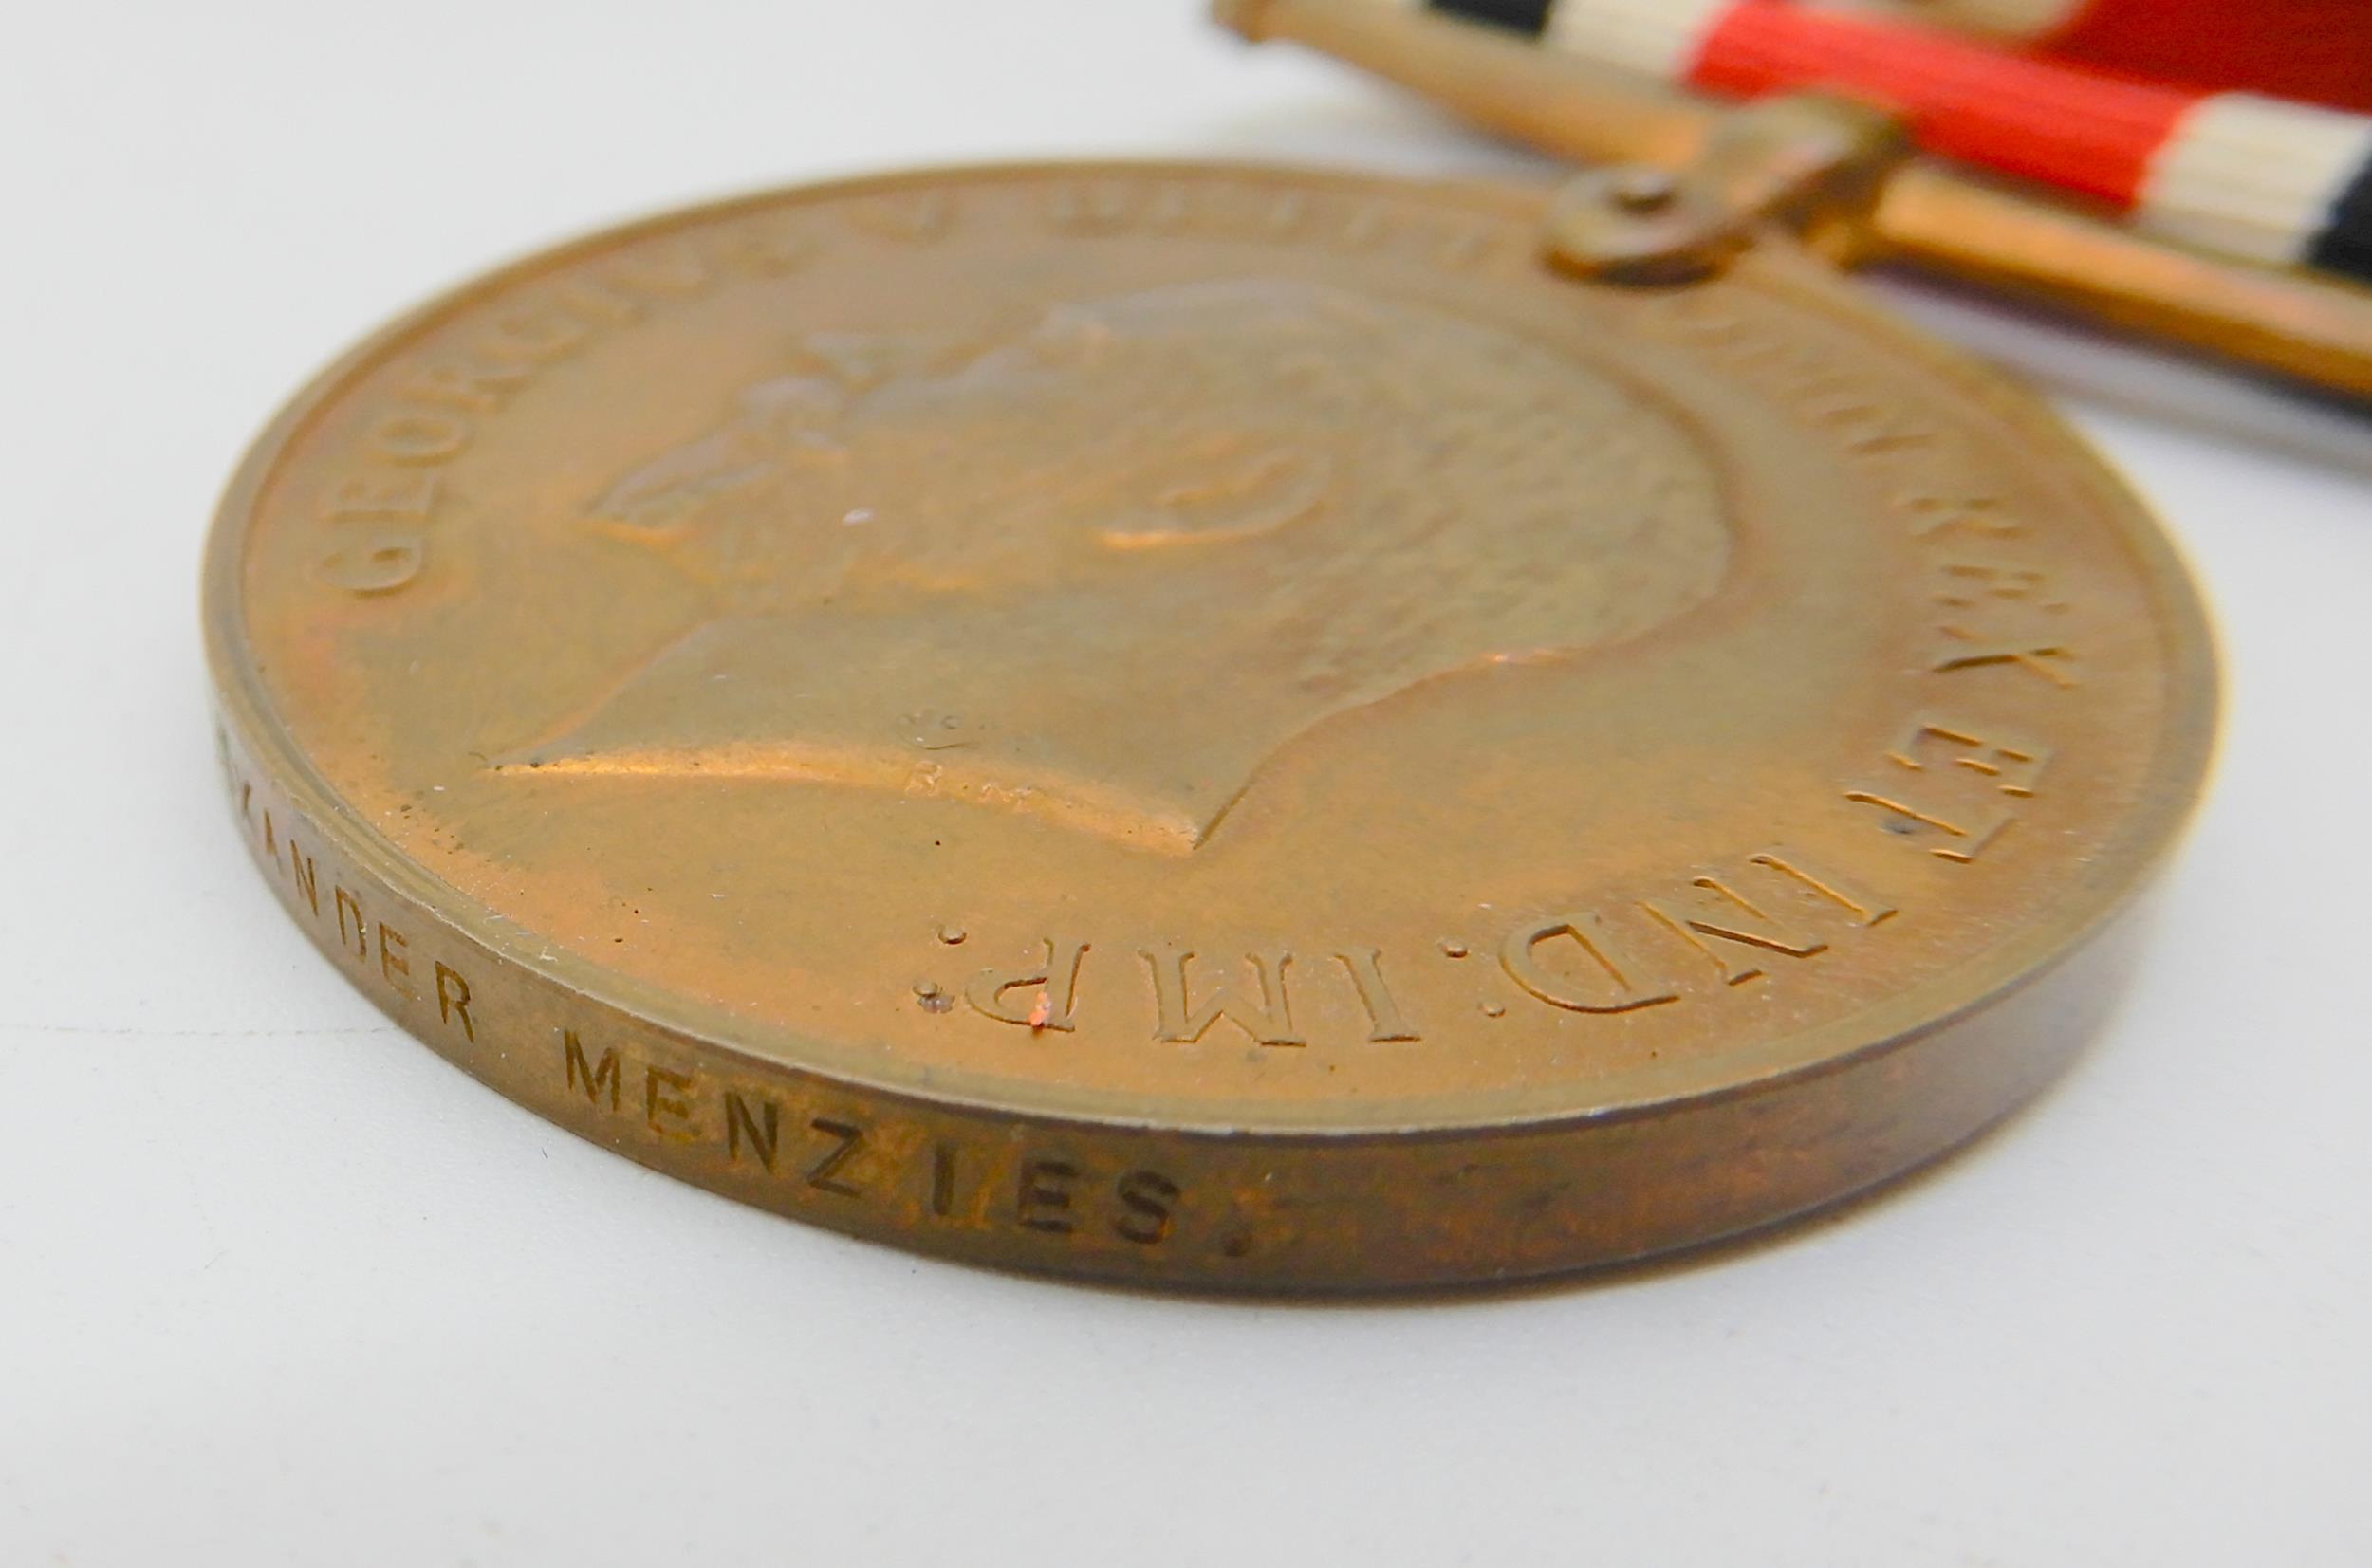 A set of three WW1 medals awarded to PTE Alexander Menzies S-23235 A. & S. H. together with a set of - Image 8 of 14